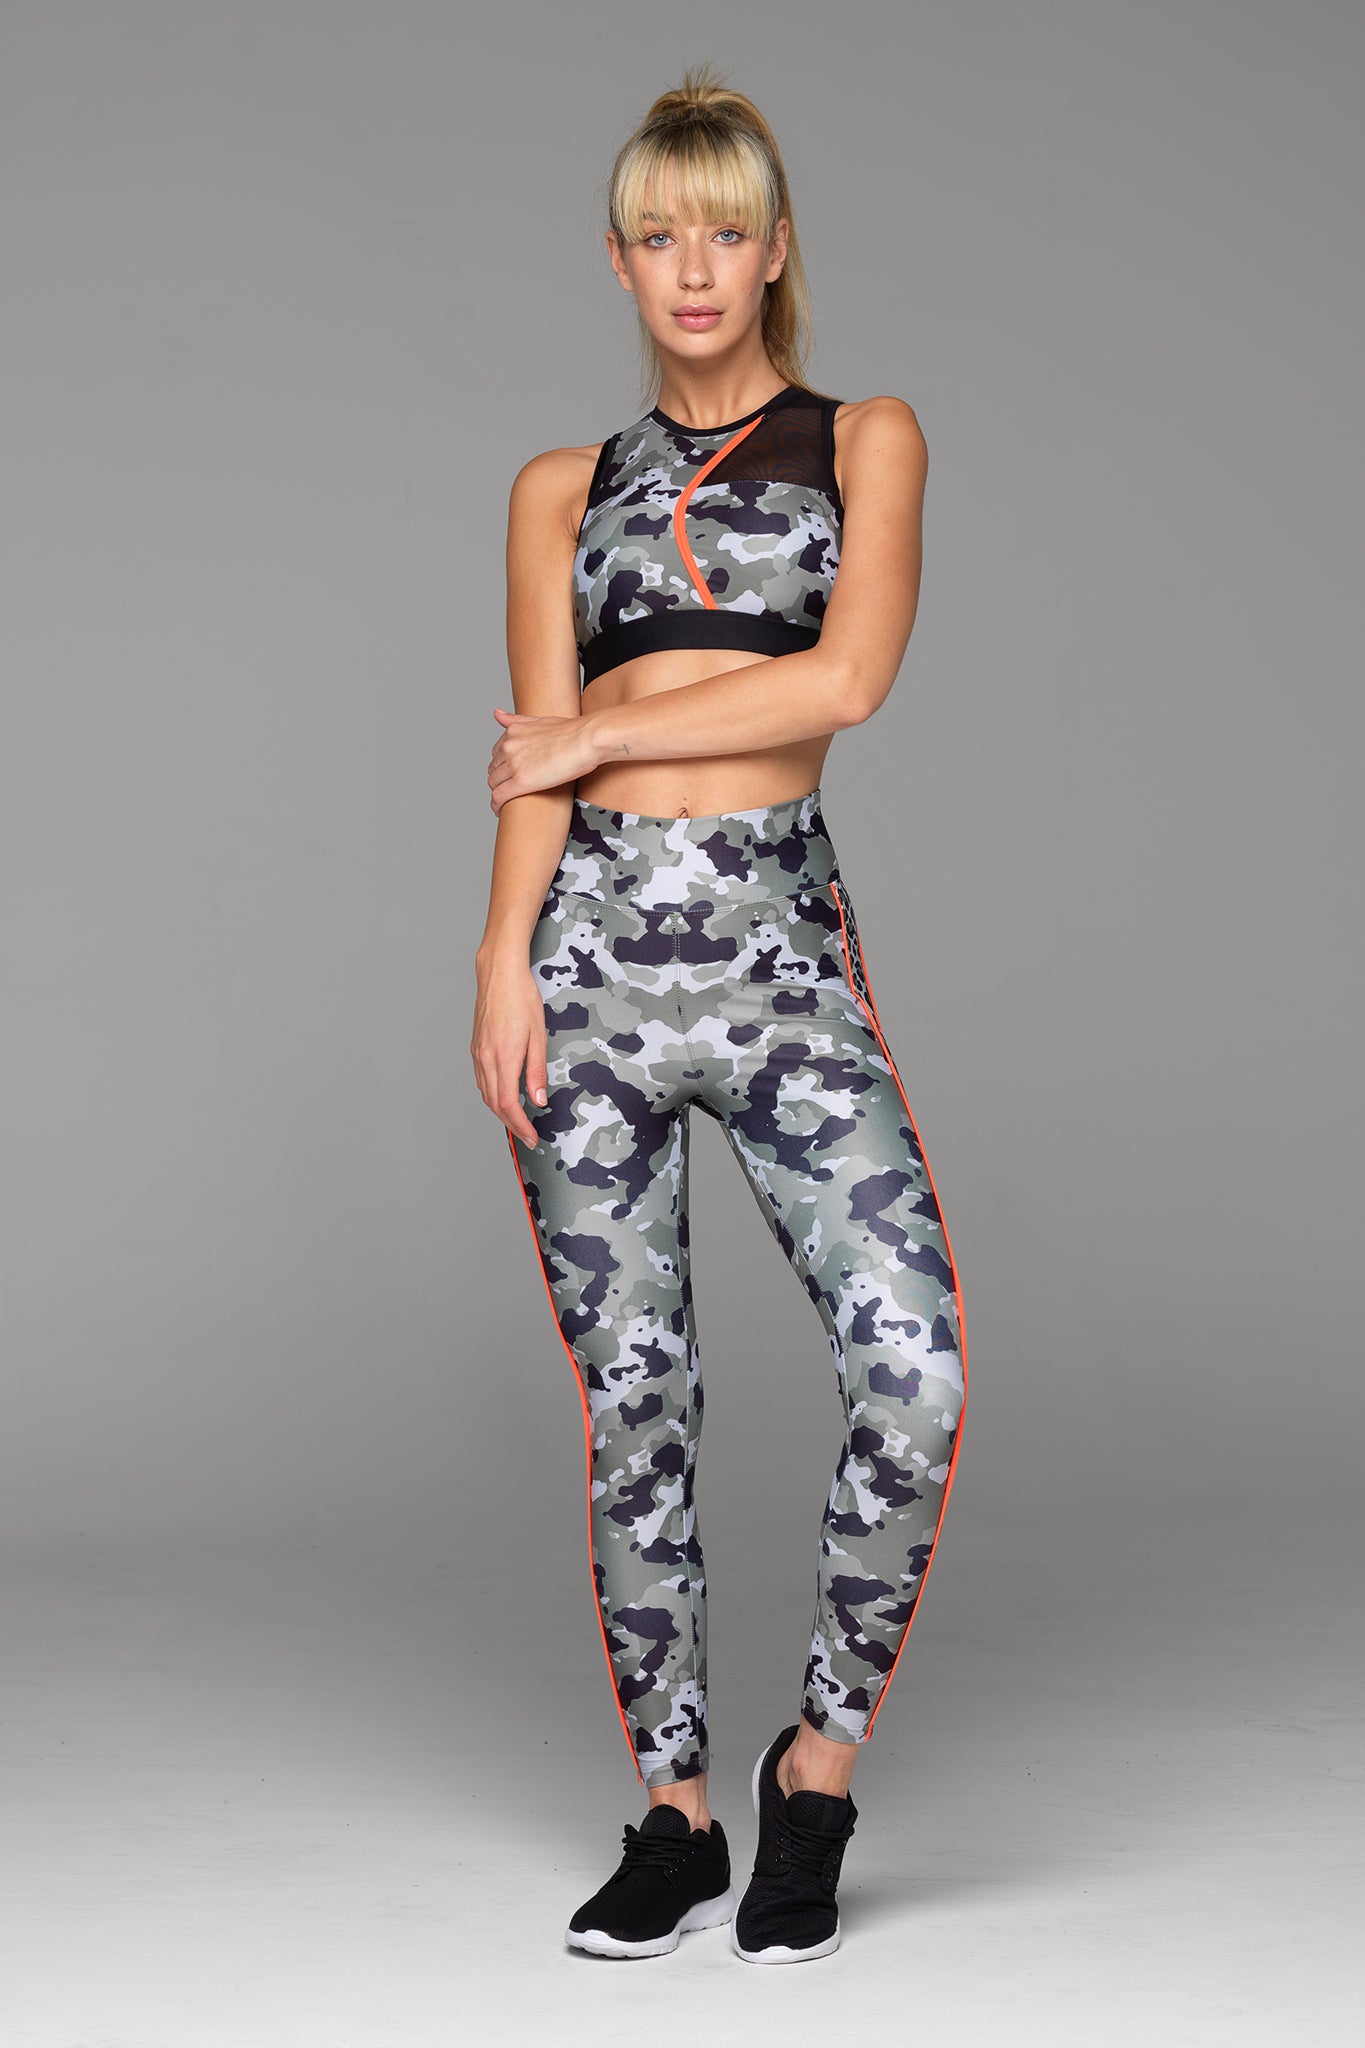 Full length photo of Tour of Duty Sports Bra in Camo Print and matching Charlie 7/8 Length Leggings.